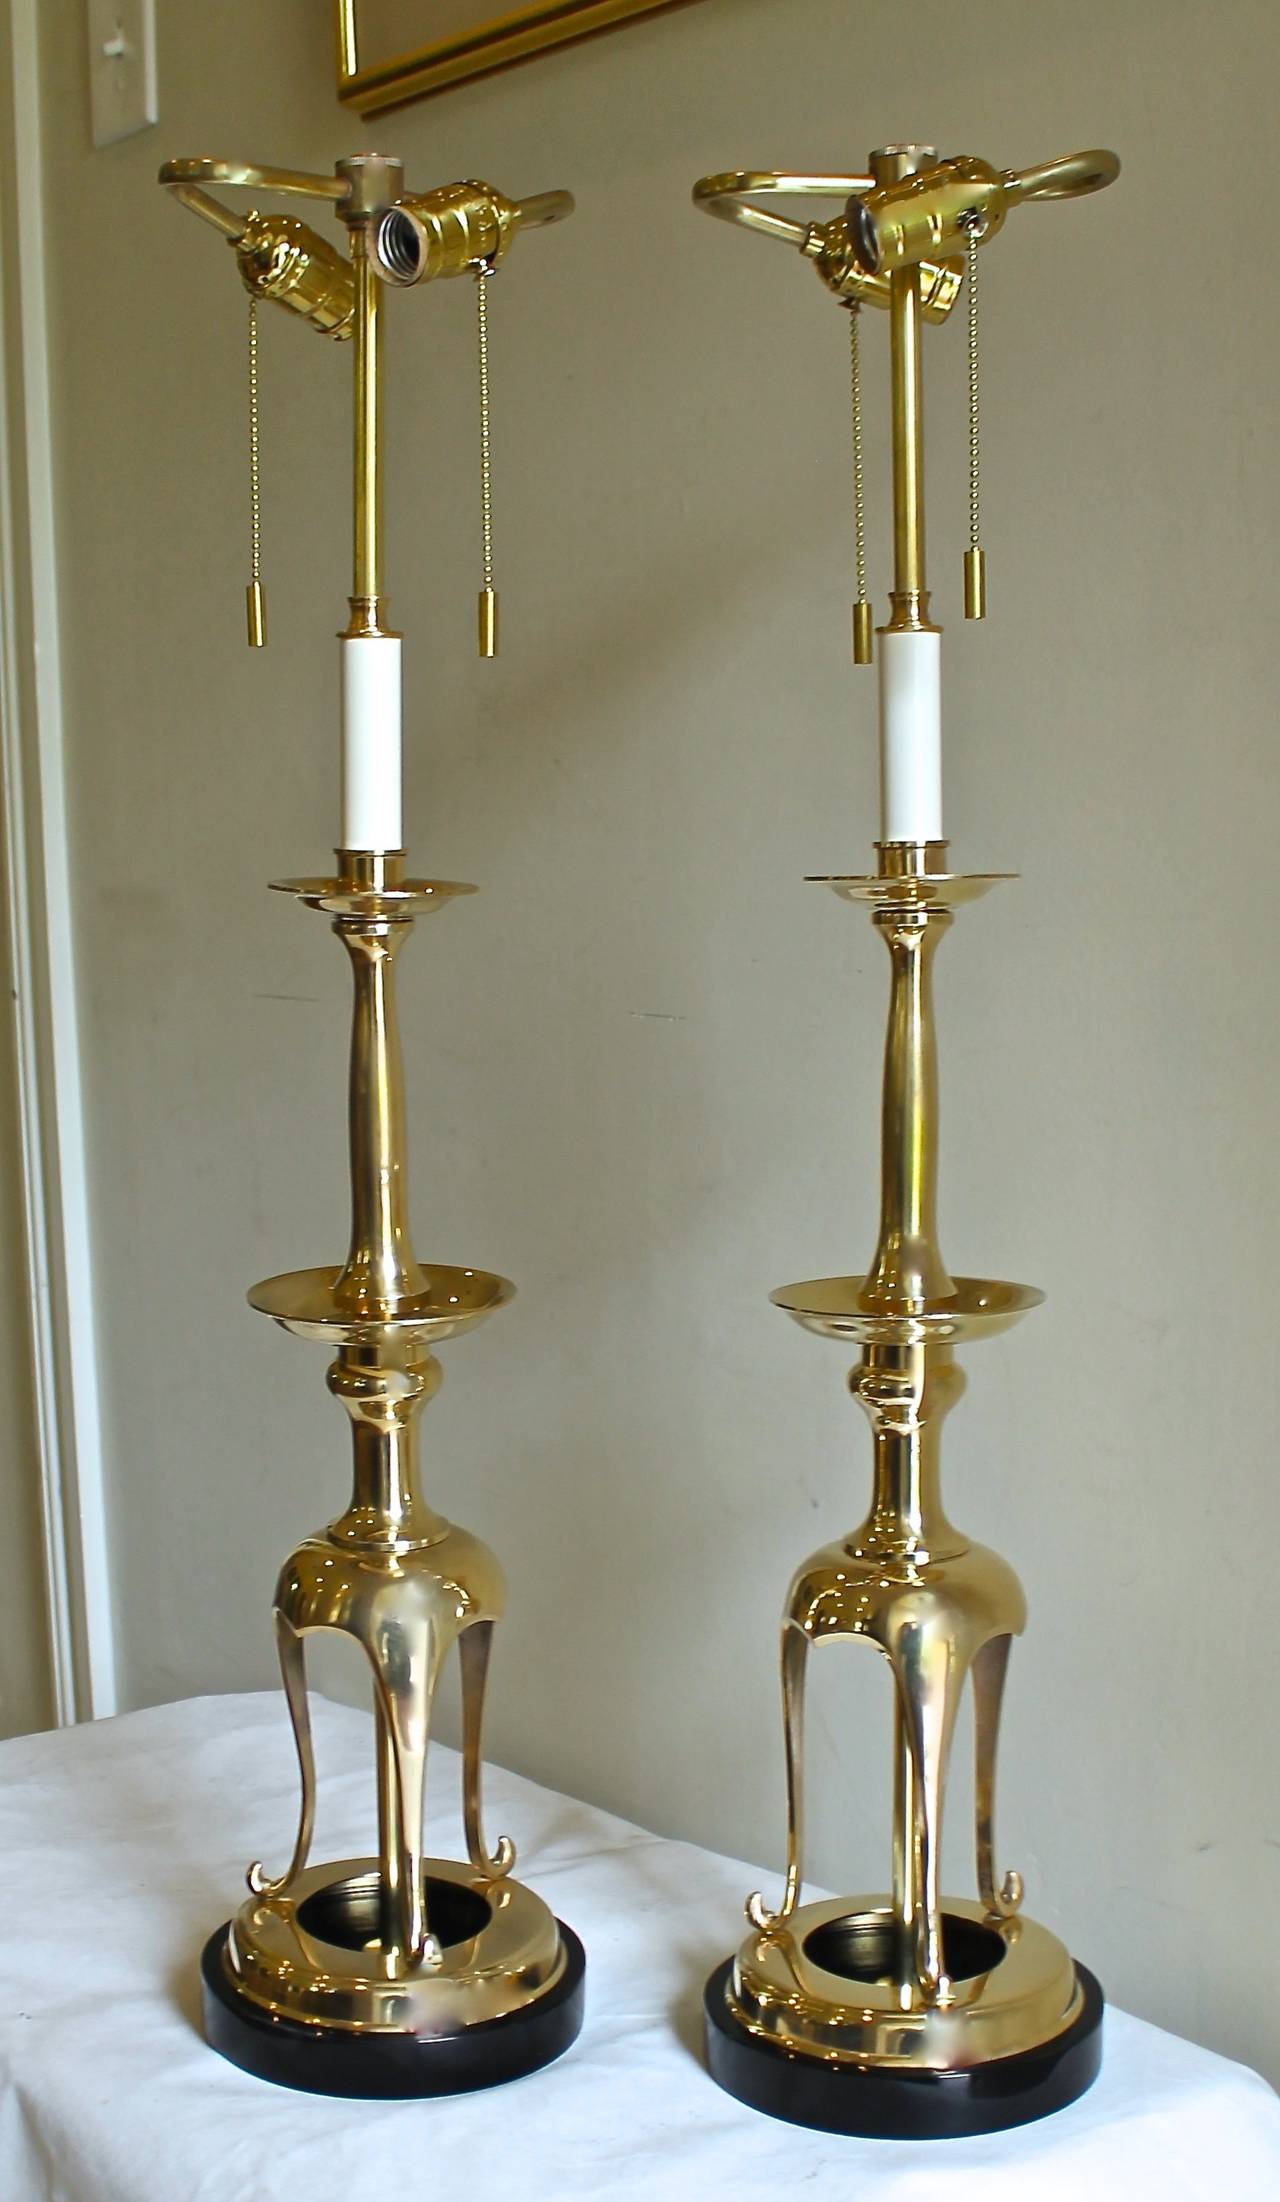 Pair solid brass Asian style candle sticks converted to table lamps resting on black lacquered wood bases. Newly wired with French style rayon covered cords and brass double cluster fittings.